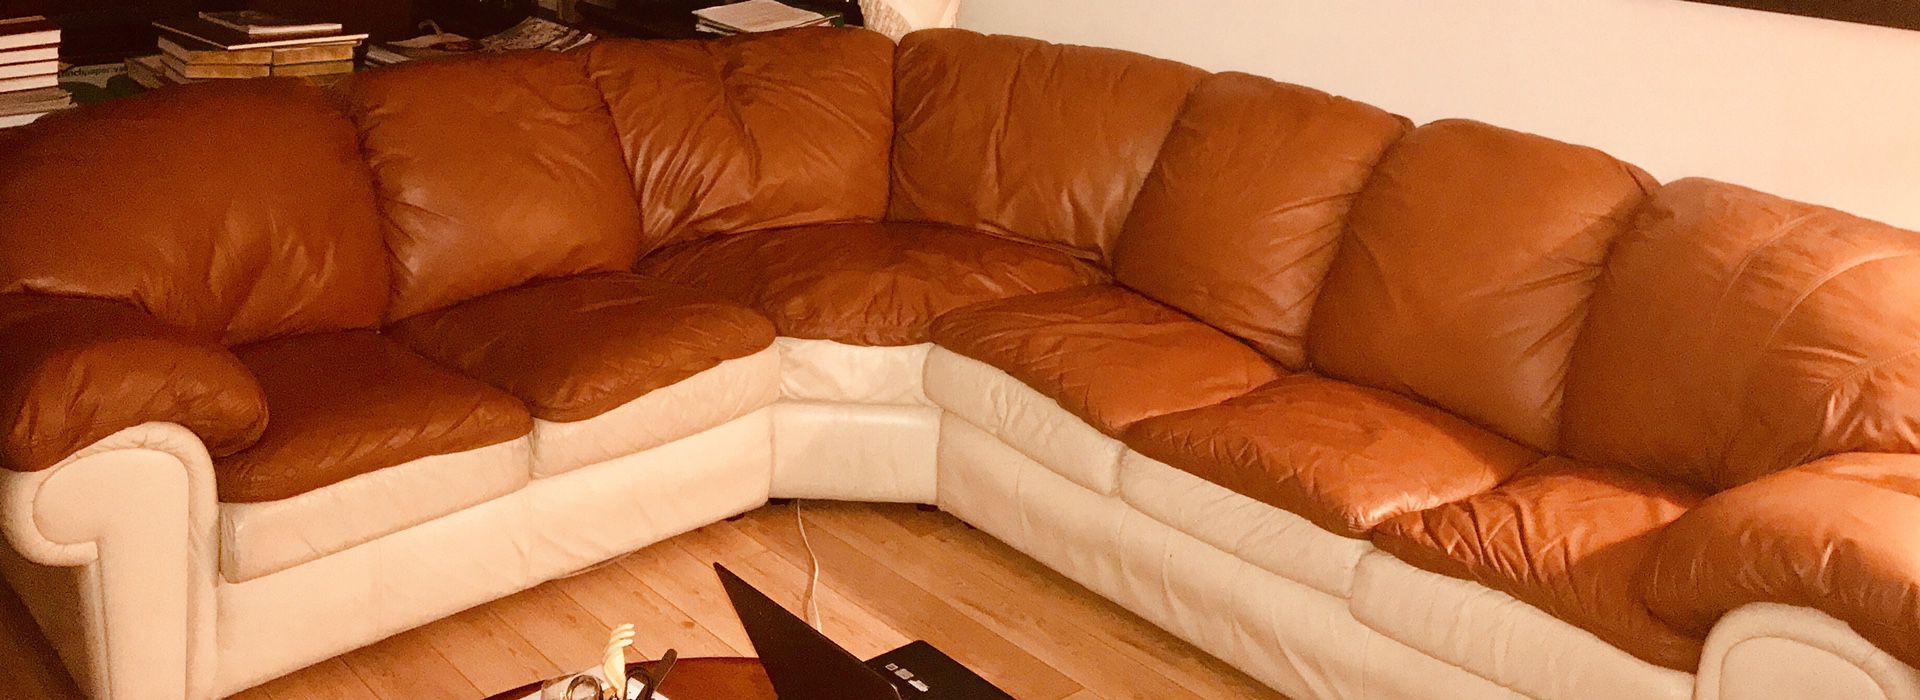 3 piece sectional real leather sofa. (Burnt Orange and Cream). Very comfy.